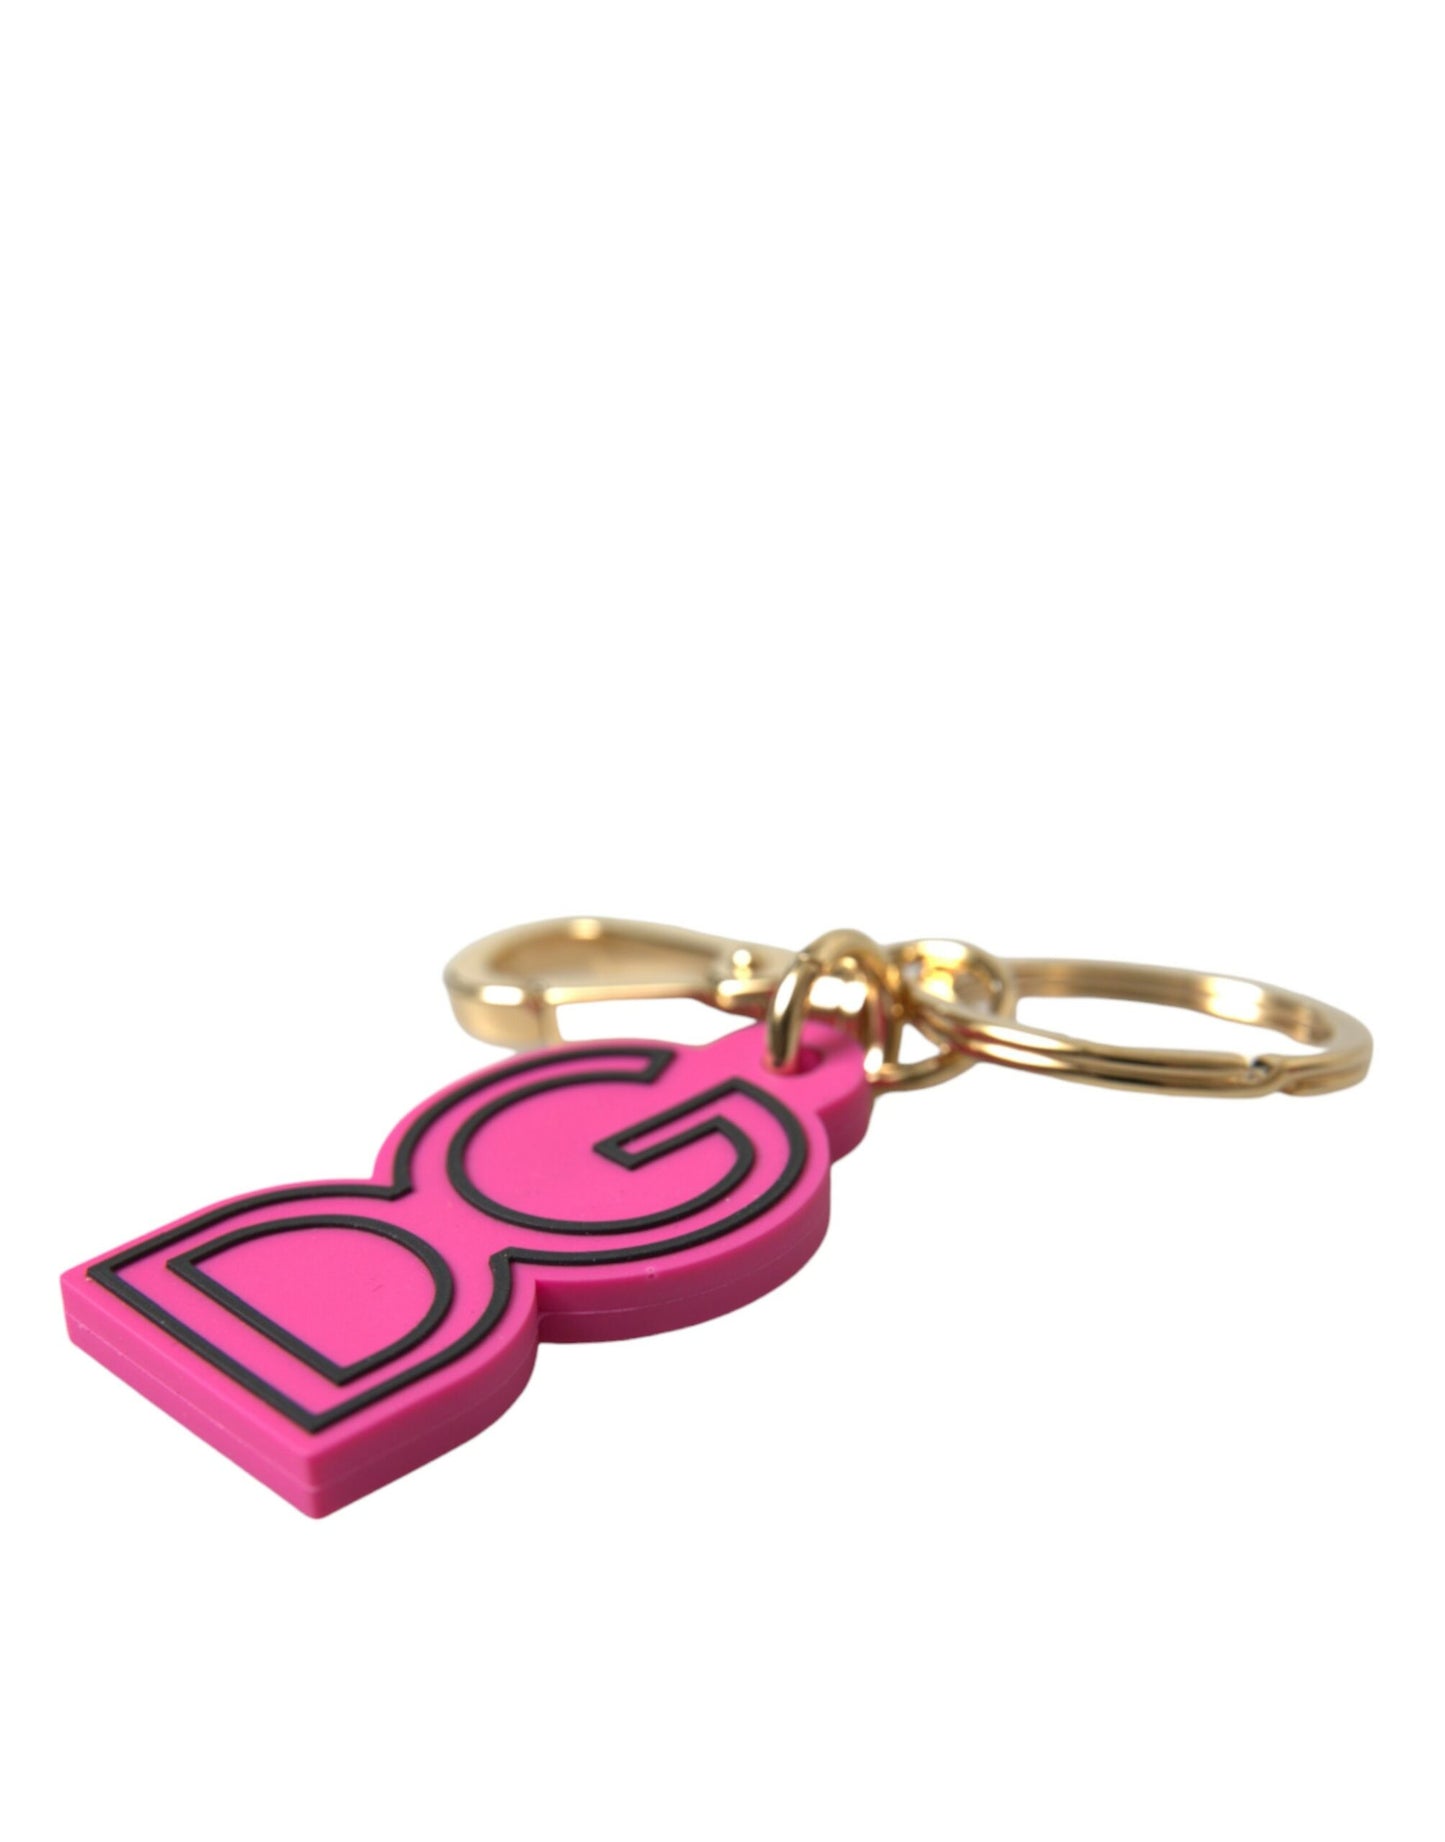 Chic Gold and Pink Keychain Elegance